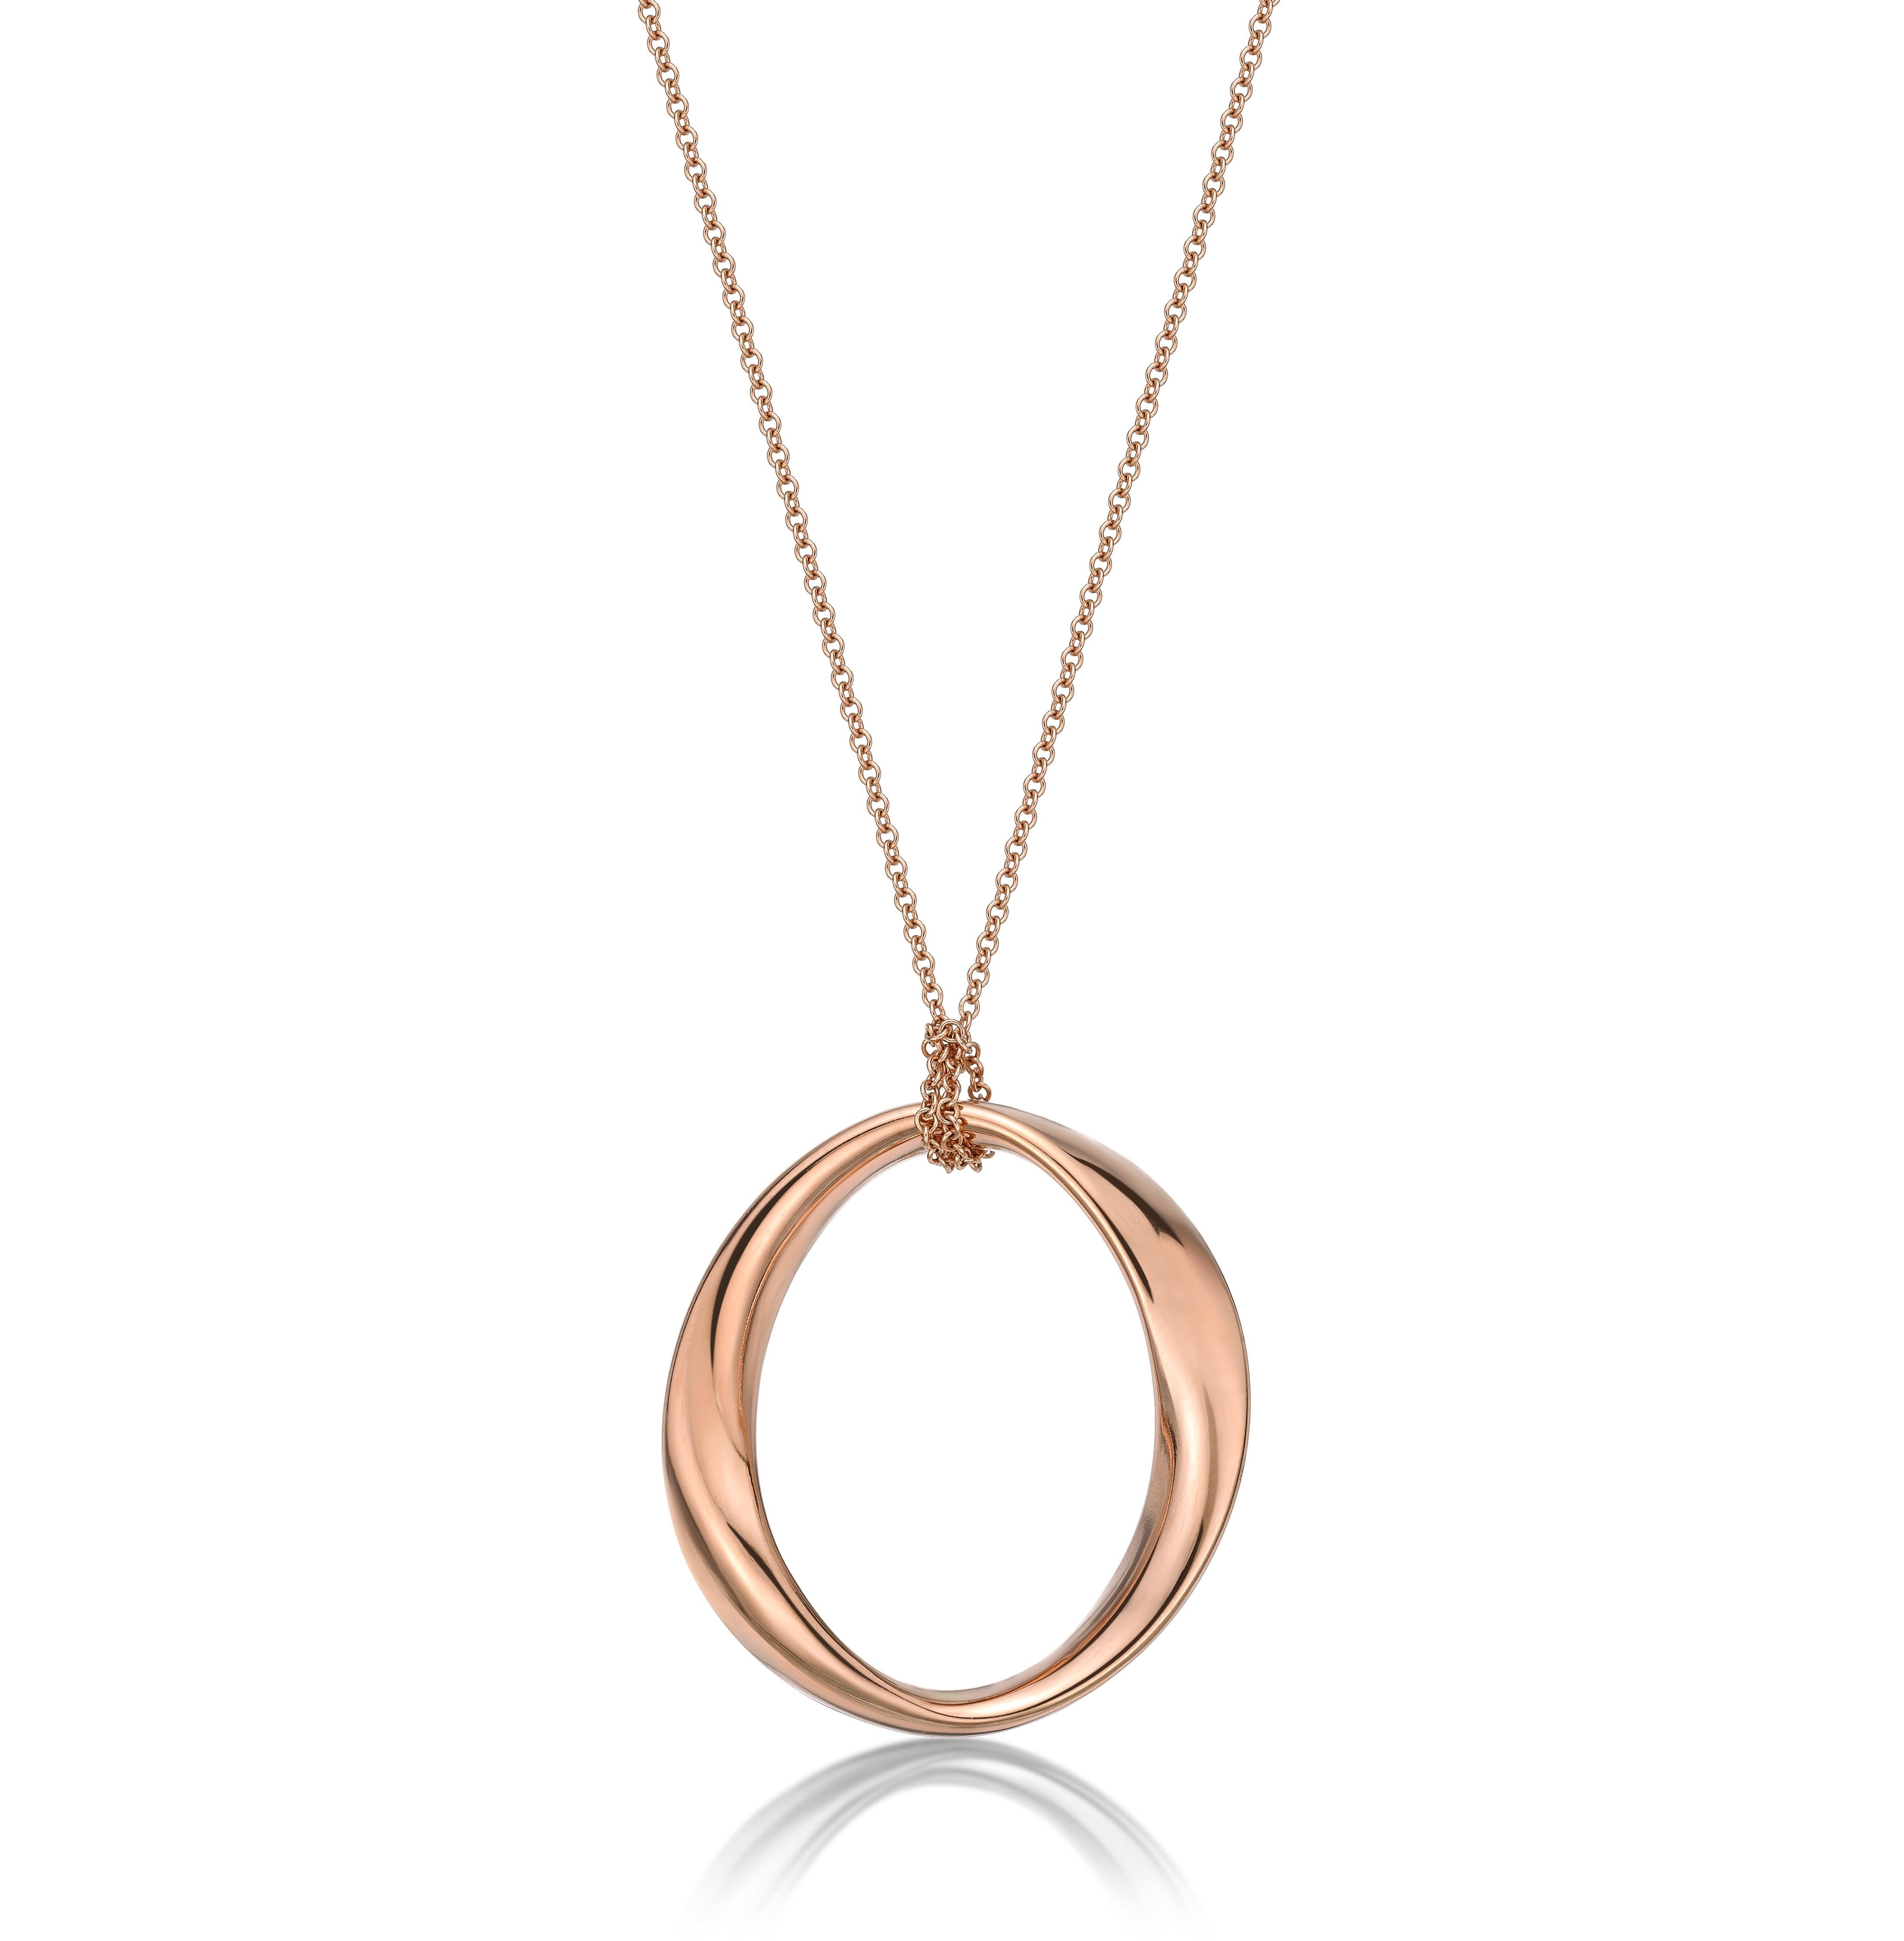 ‘’ O ’’  shape 18K gold necklace with detachable  pendant, available in different colours ( yellow gold, white gold and rose gold), simple, elegant and stylish. 